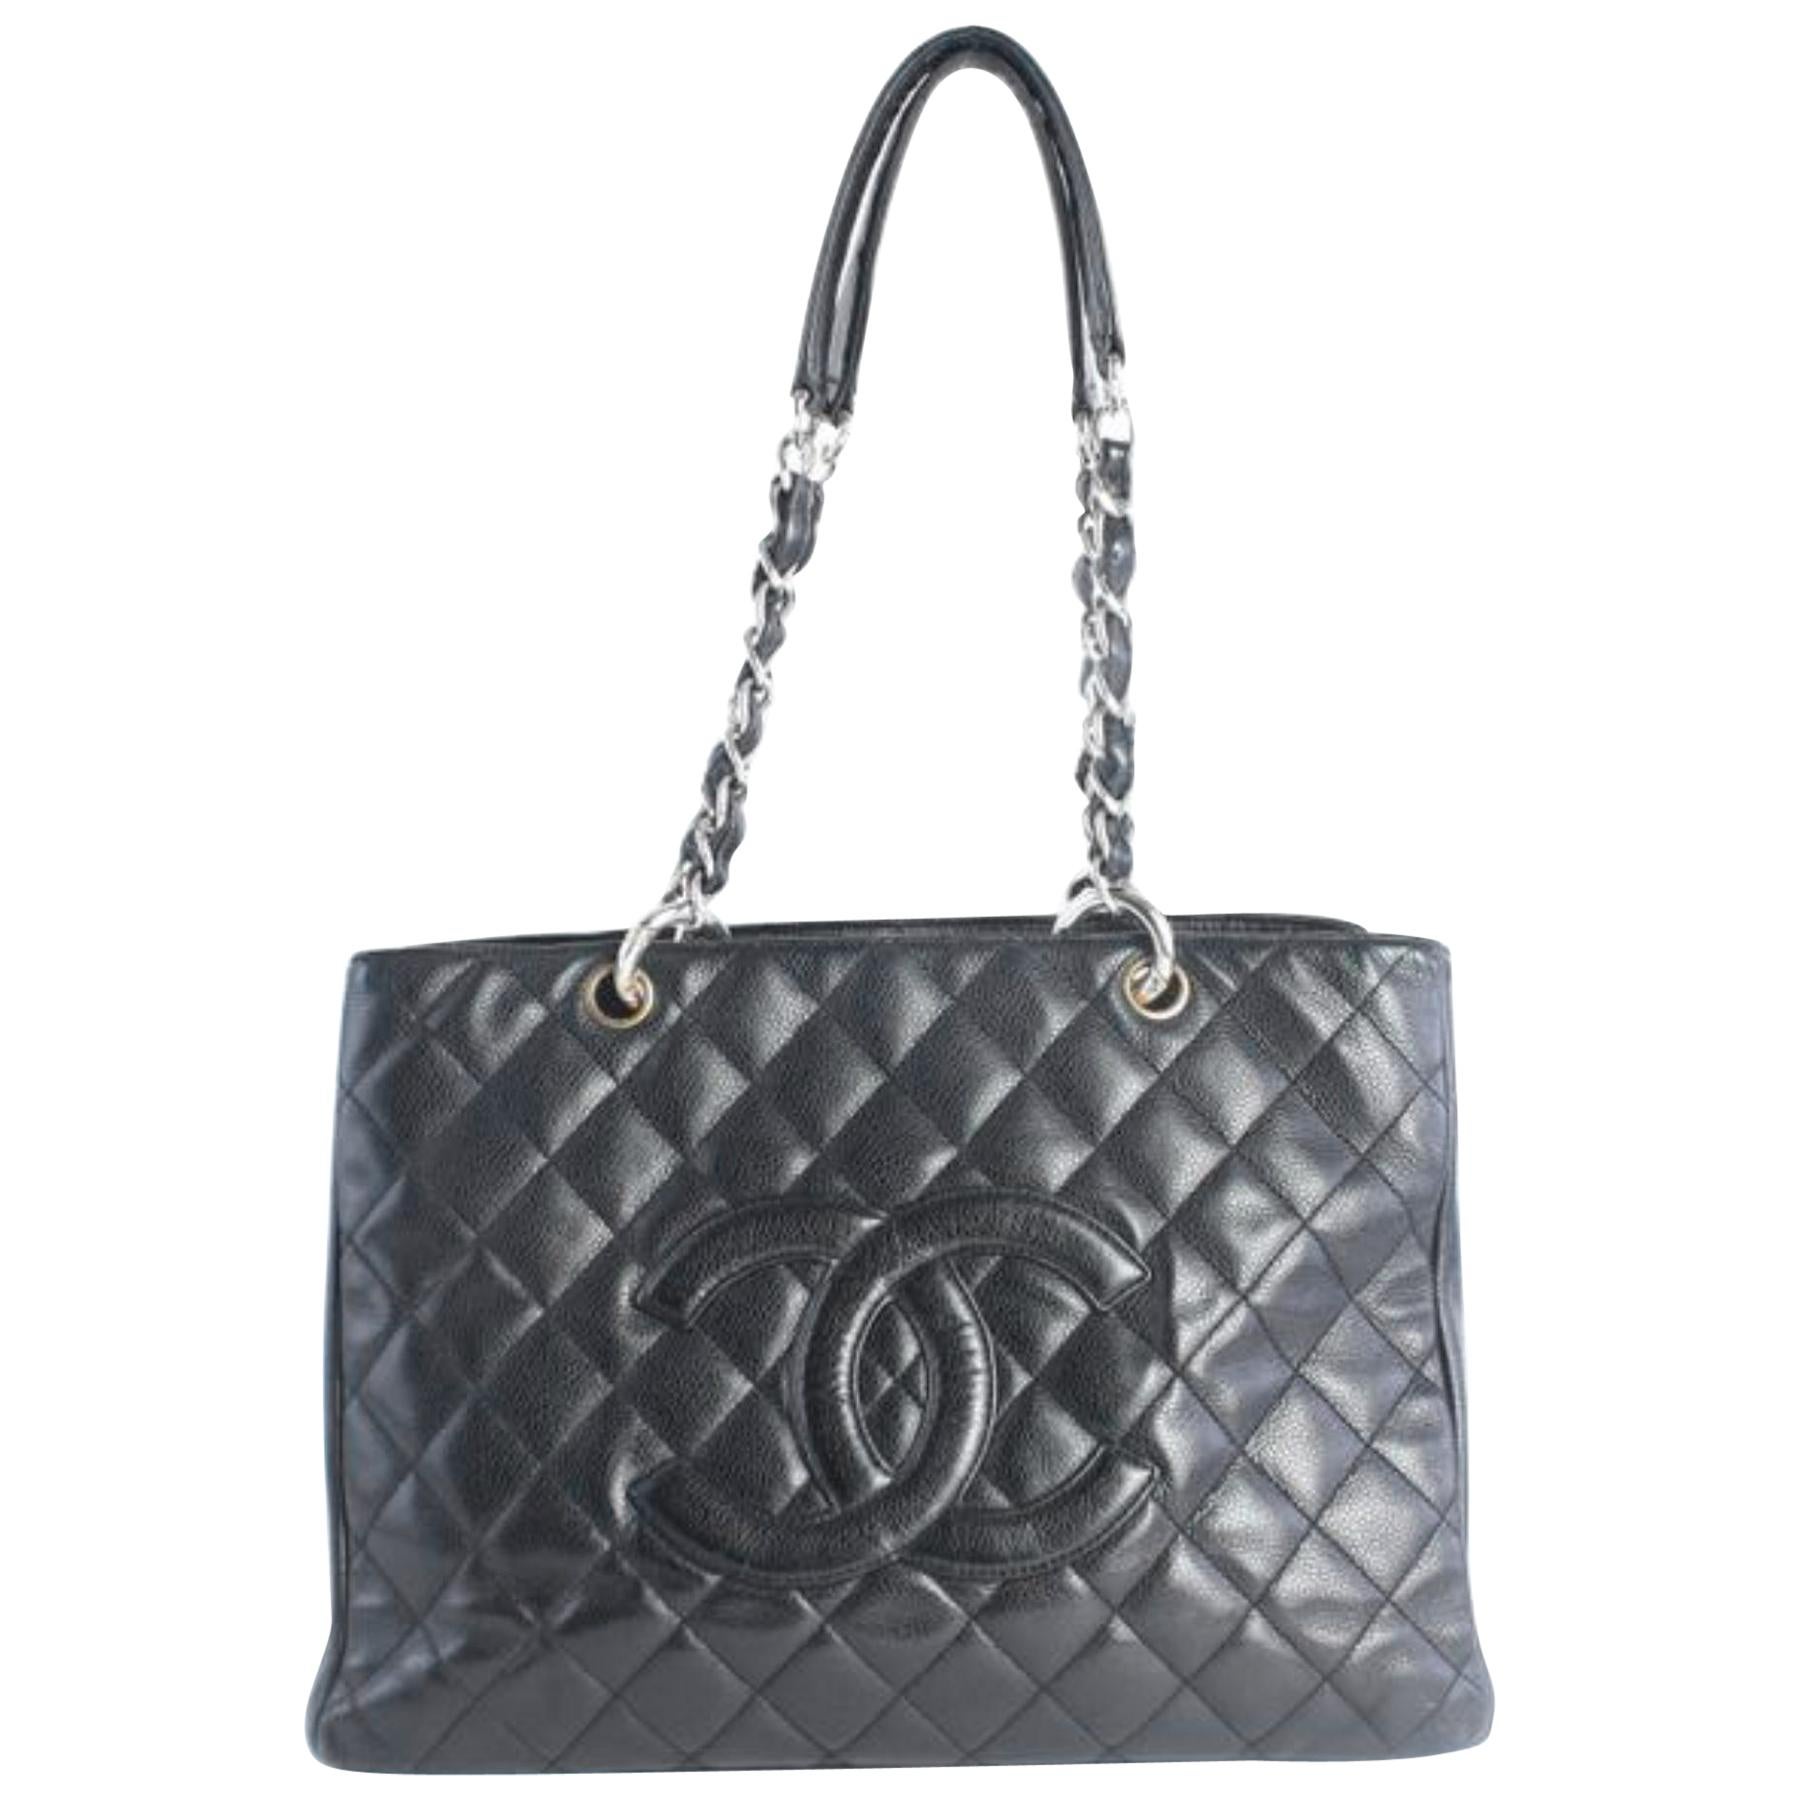 Chanel Shopping Tote Quilted Gst 17cz0828 Black Leather Shoulder Bag For Sale